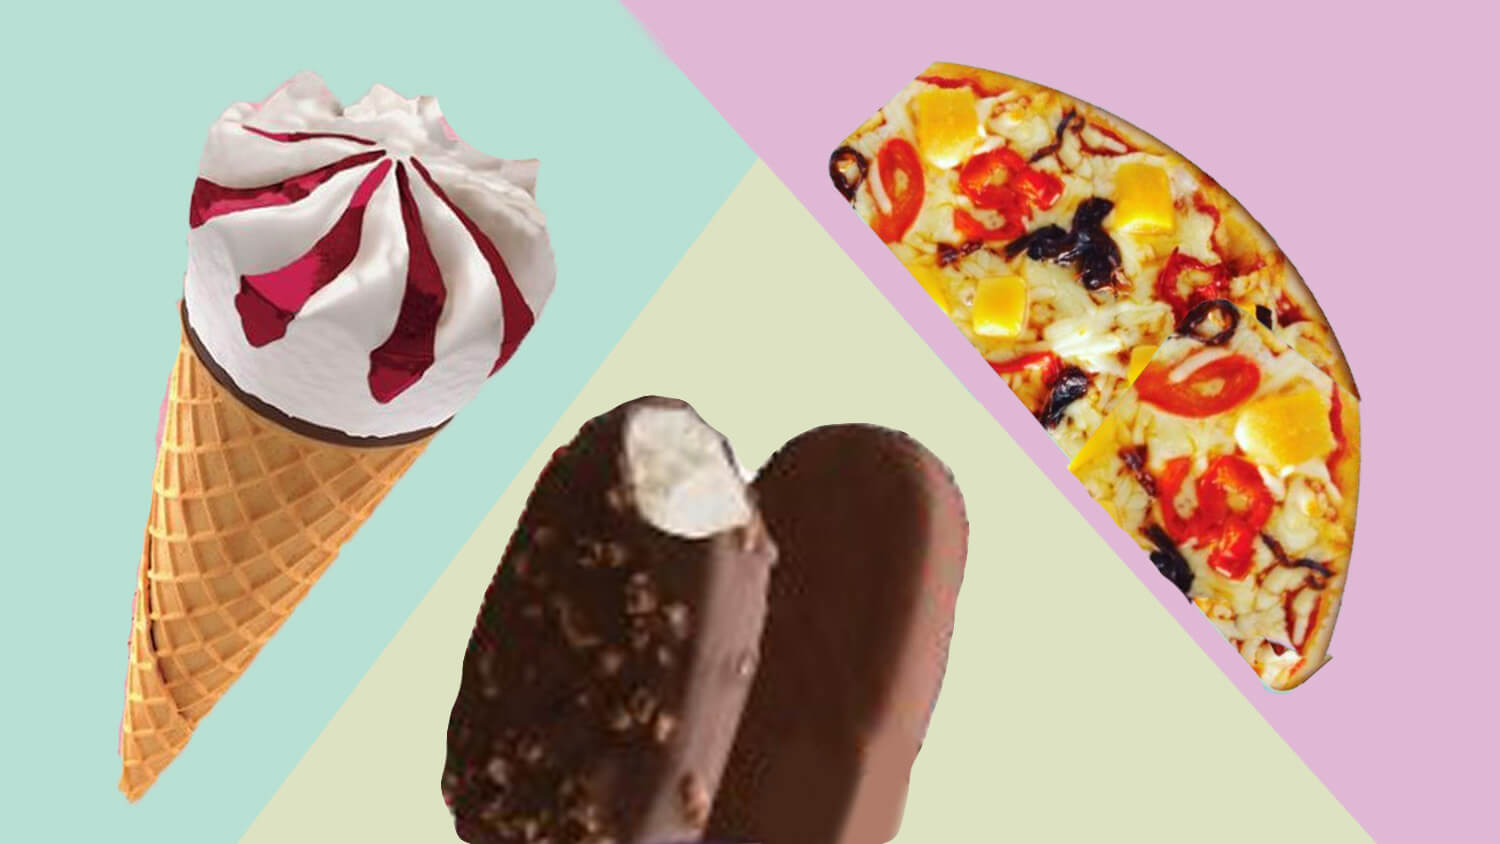 Whole Creations Launches Vegan Pizza and Dairy-Free Ice Cream at Sainsbury's